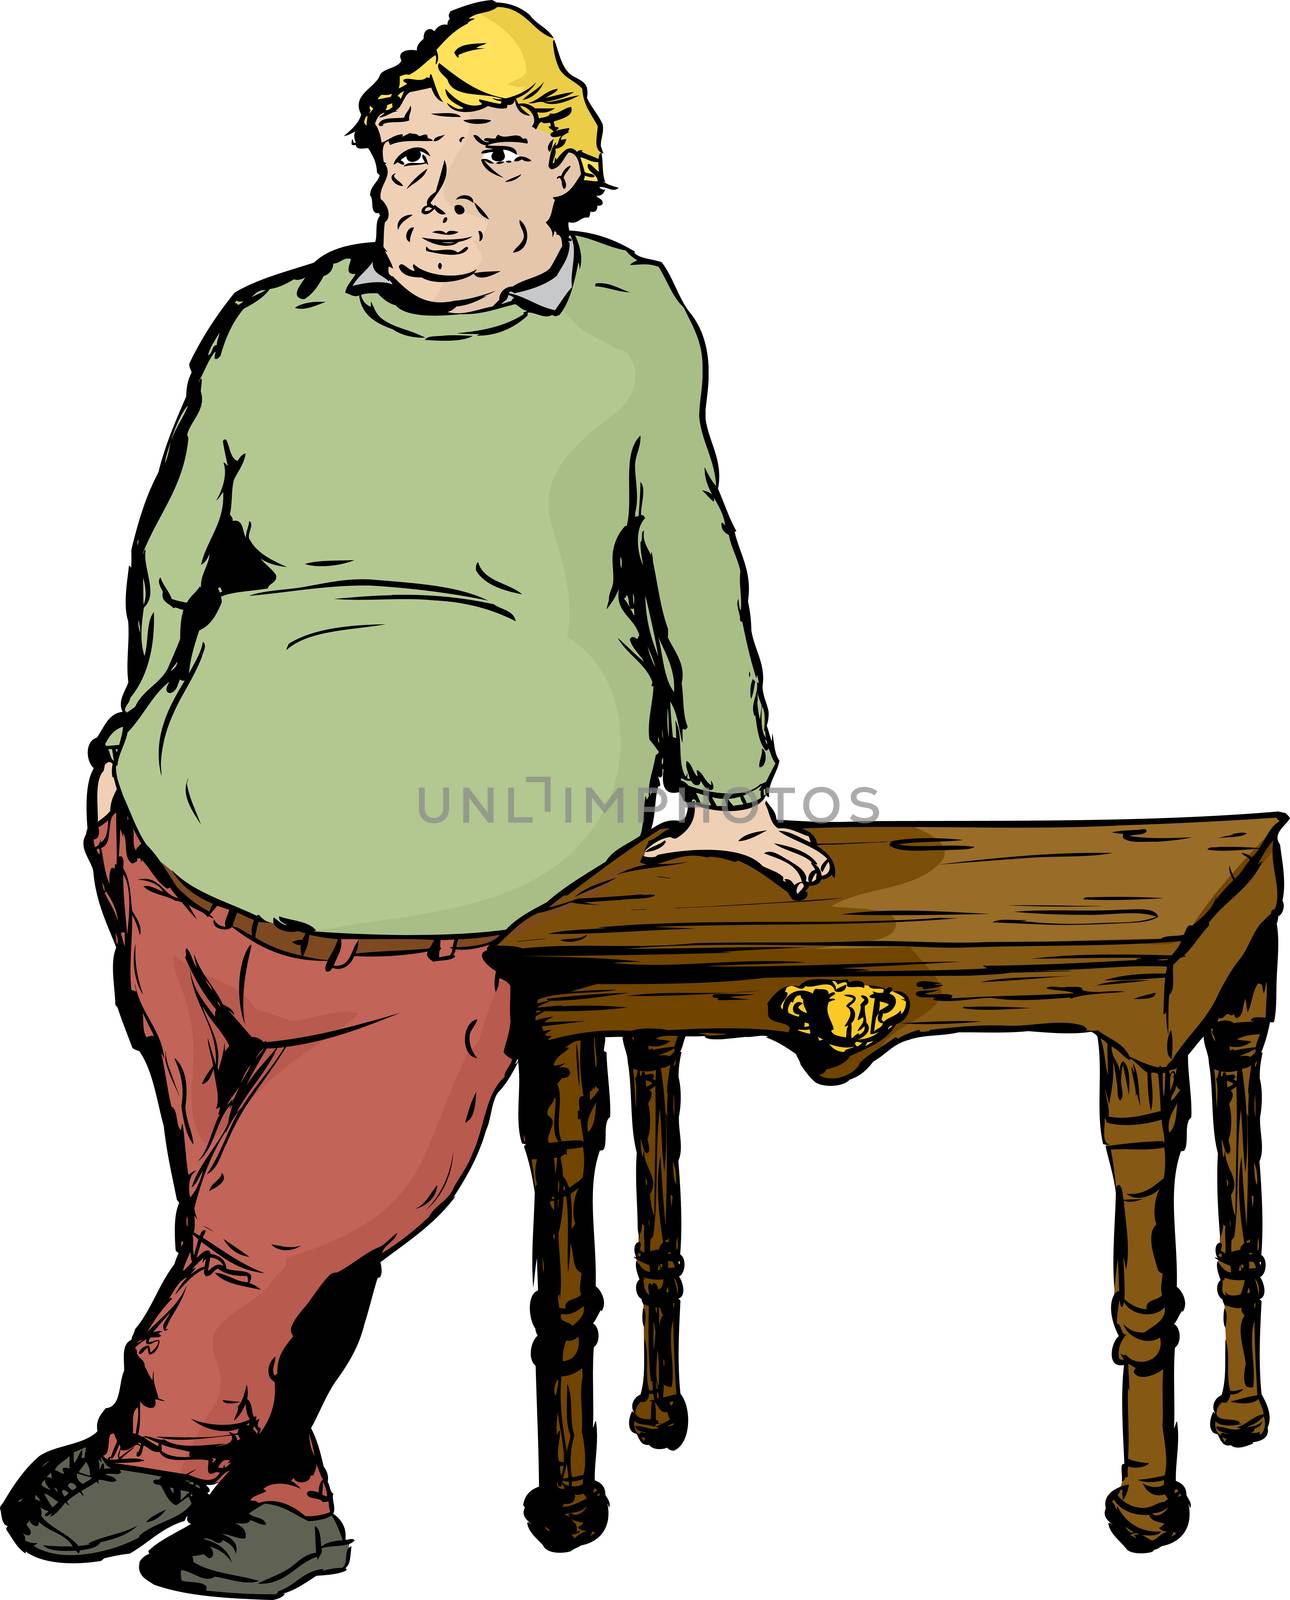 Serious Overweight Man Leaning on Table by TheBlackRhino